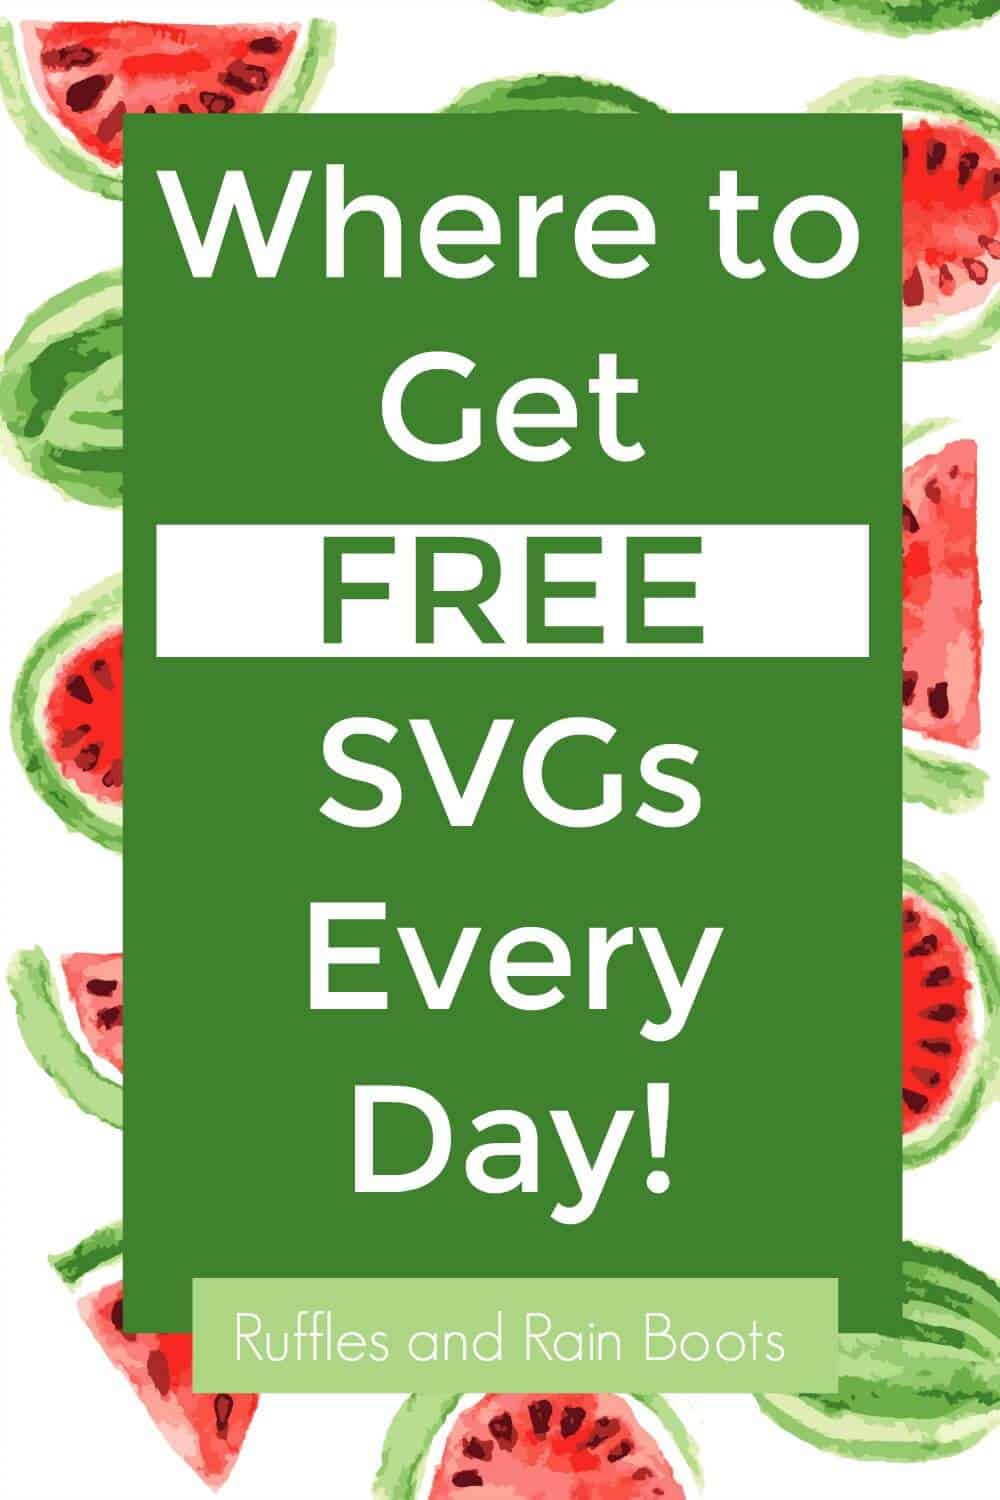 watermelon background with text which reads where to get free svgs every day